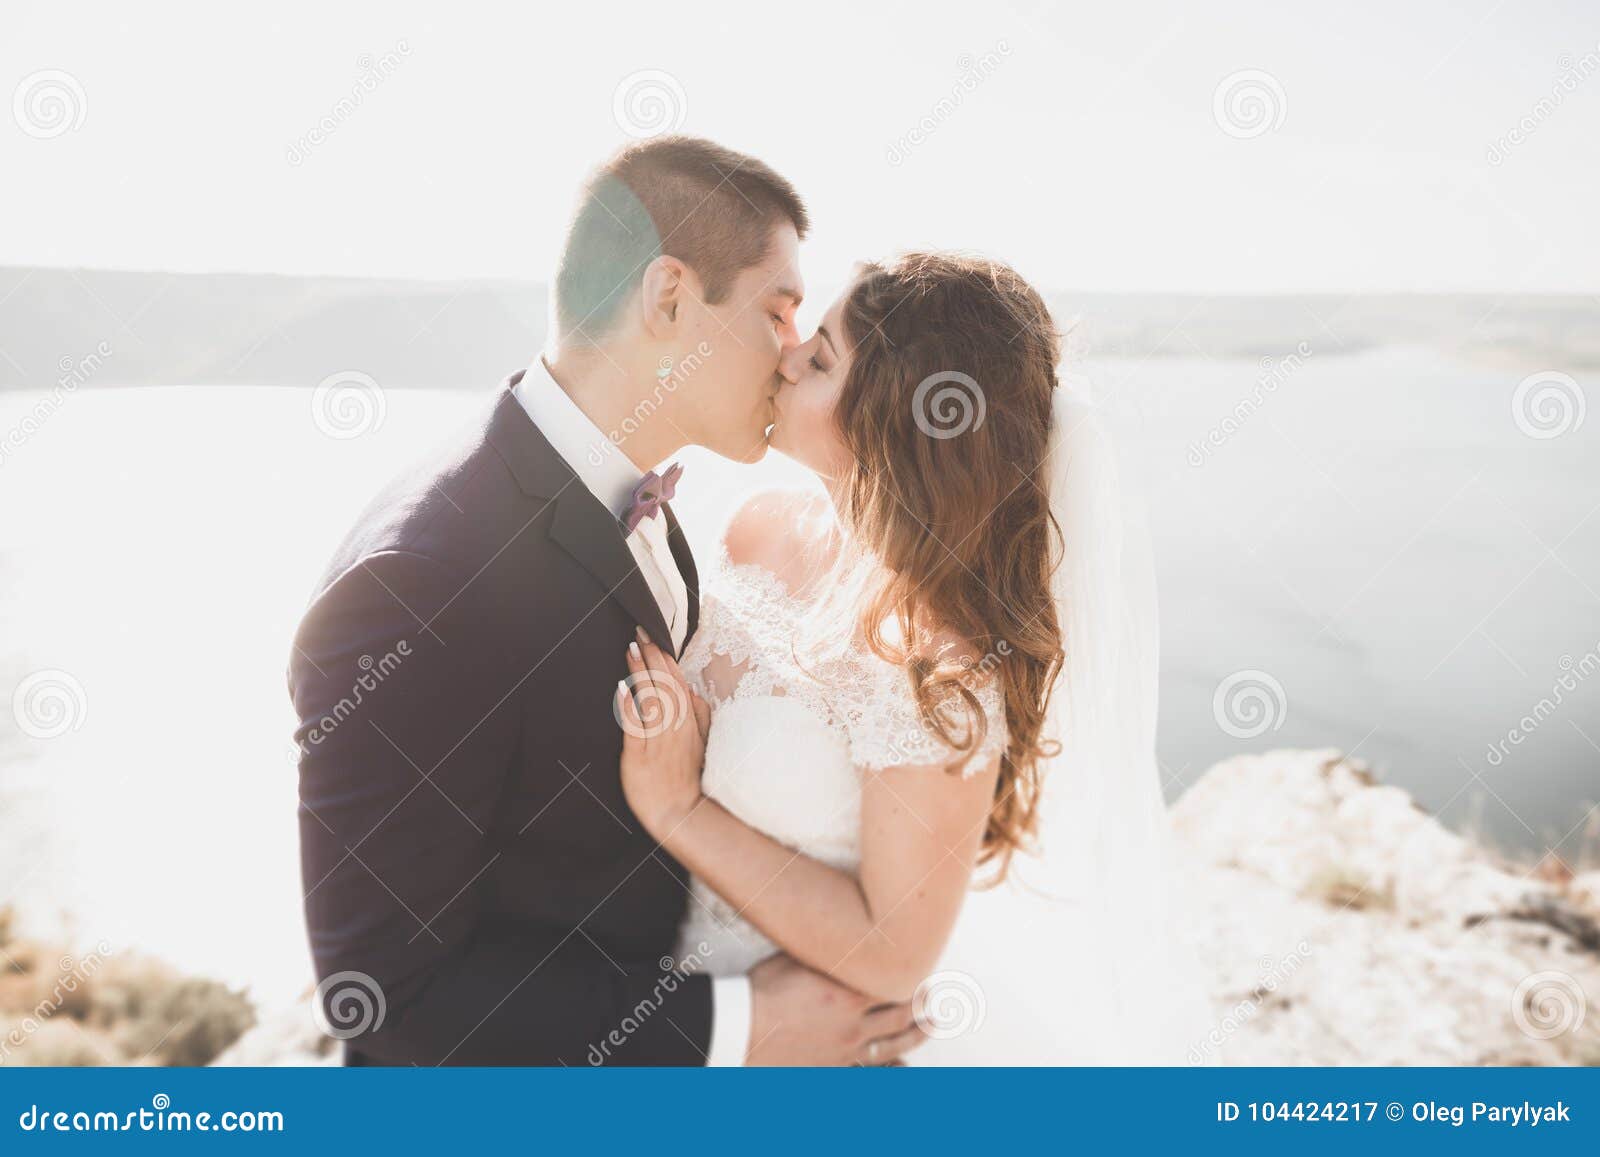 Happy And Romantic Scene Of Just Married Young Wedding Couple Posing